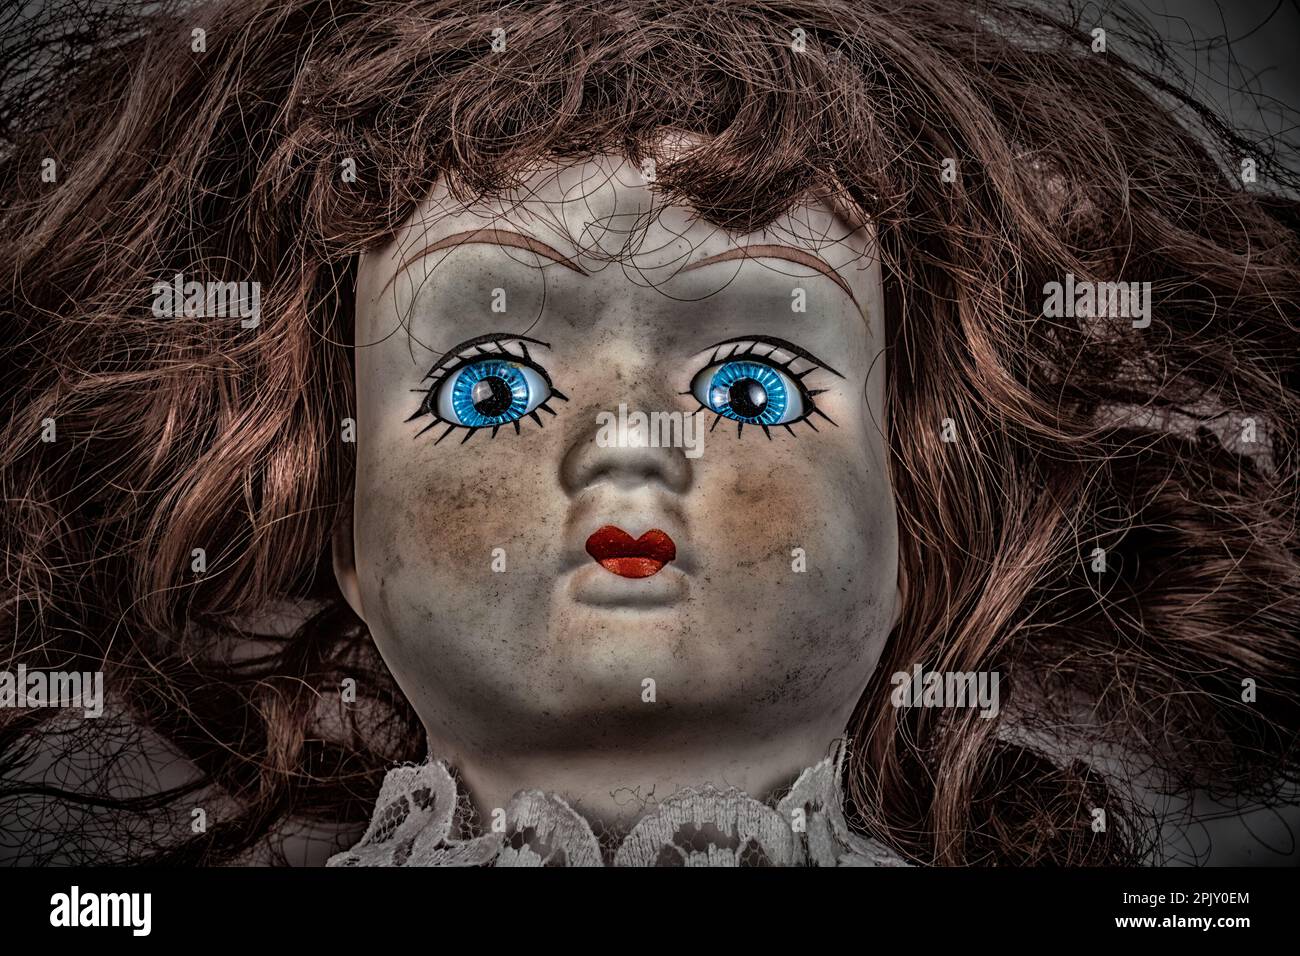 Old doll, demonic face Stock Photo